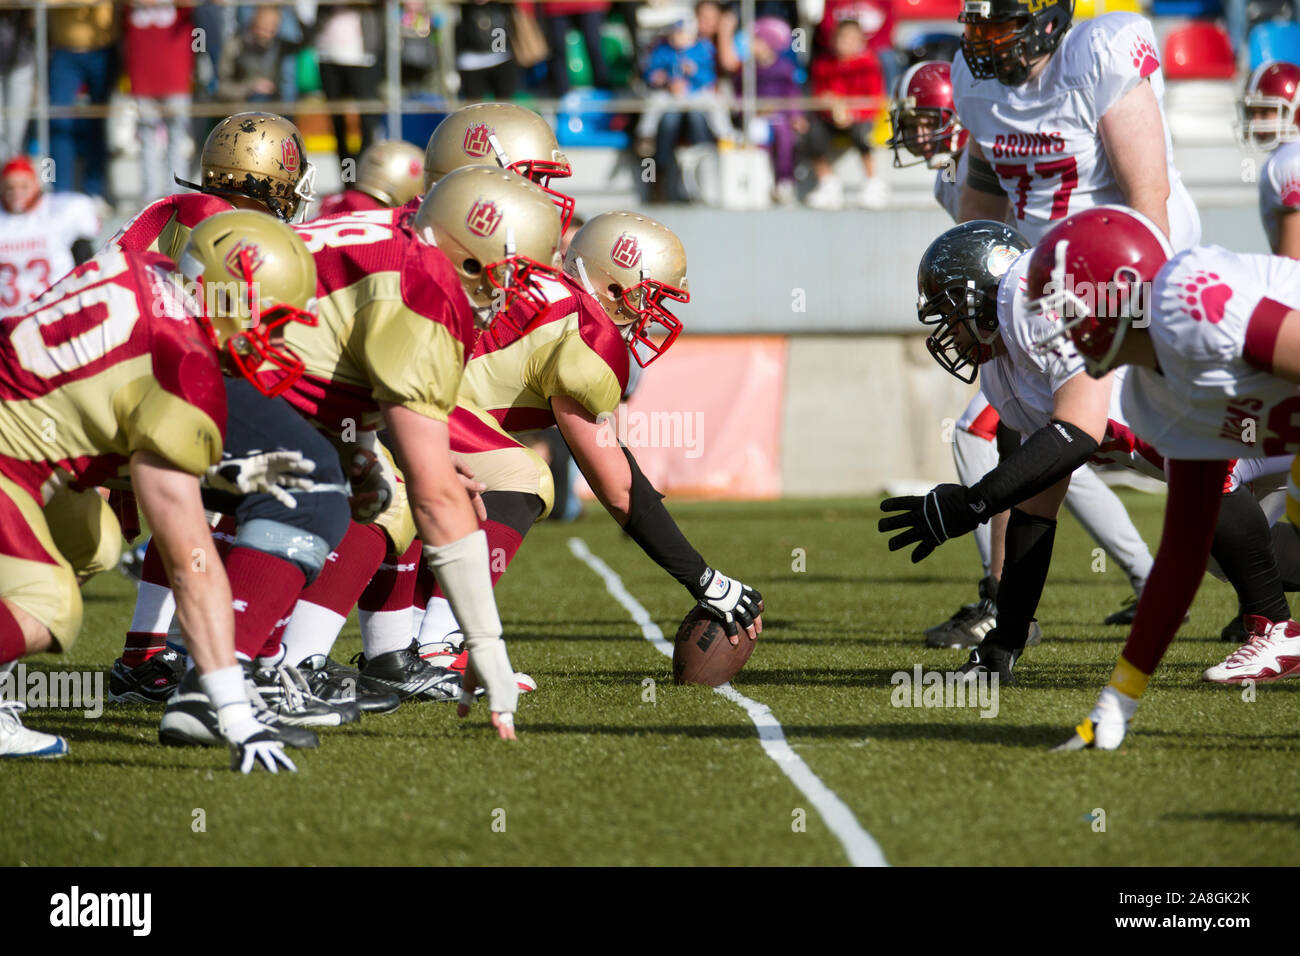 Moscow, Russia. 29th of September, 2012 Game moment in the match between the Moscow Bruins (Russia) and Minsk Litwins (Belarus)  of The American Football Eastern League Final at Trud stadium in Moscow Stock Photo